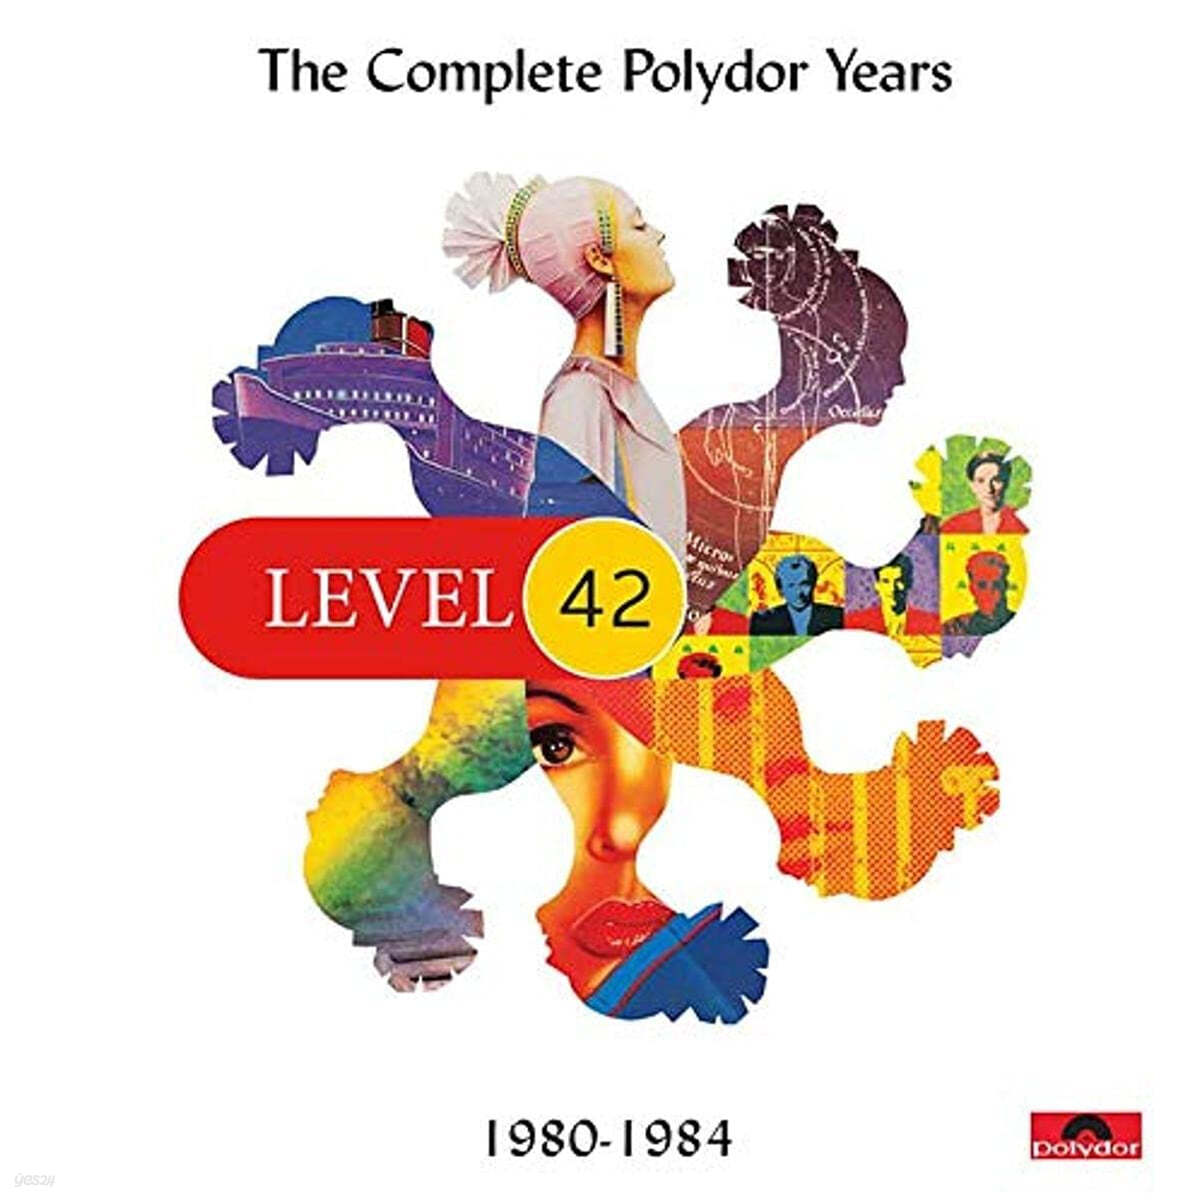 Level 42 (레벨 42) - The Complete Polydor Years 1980-1984 